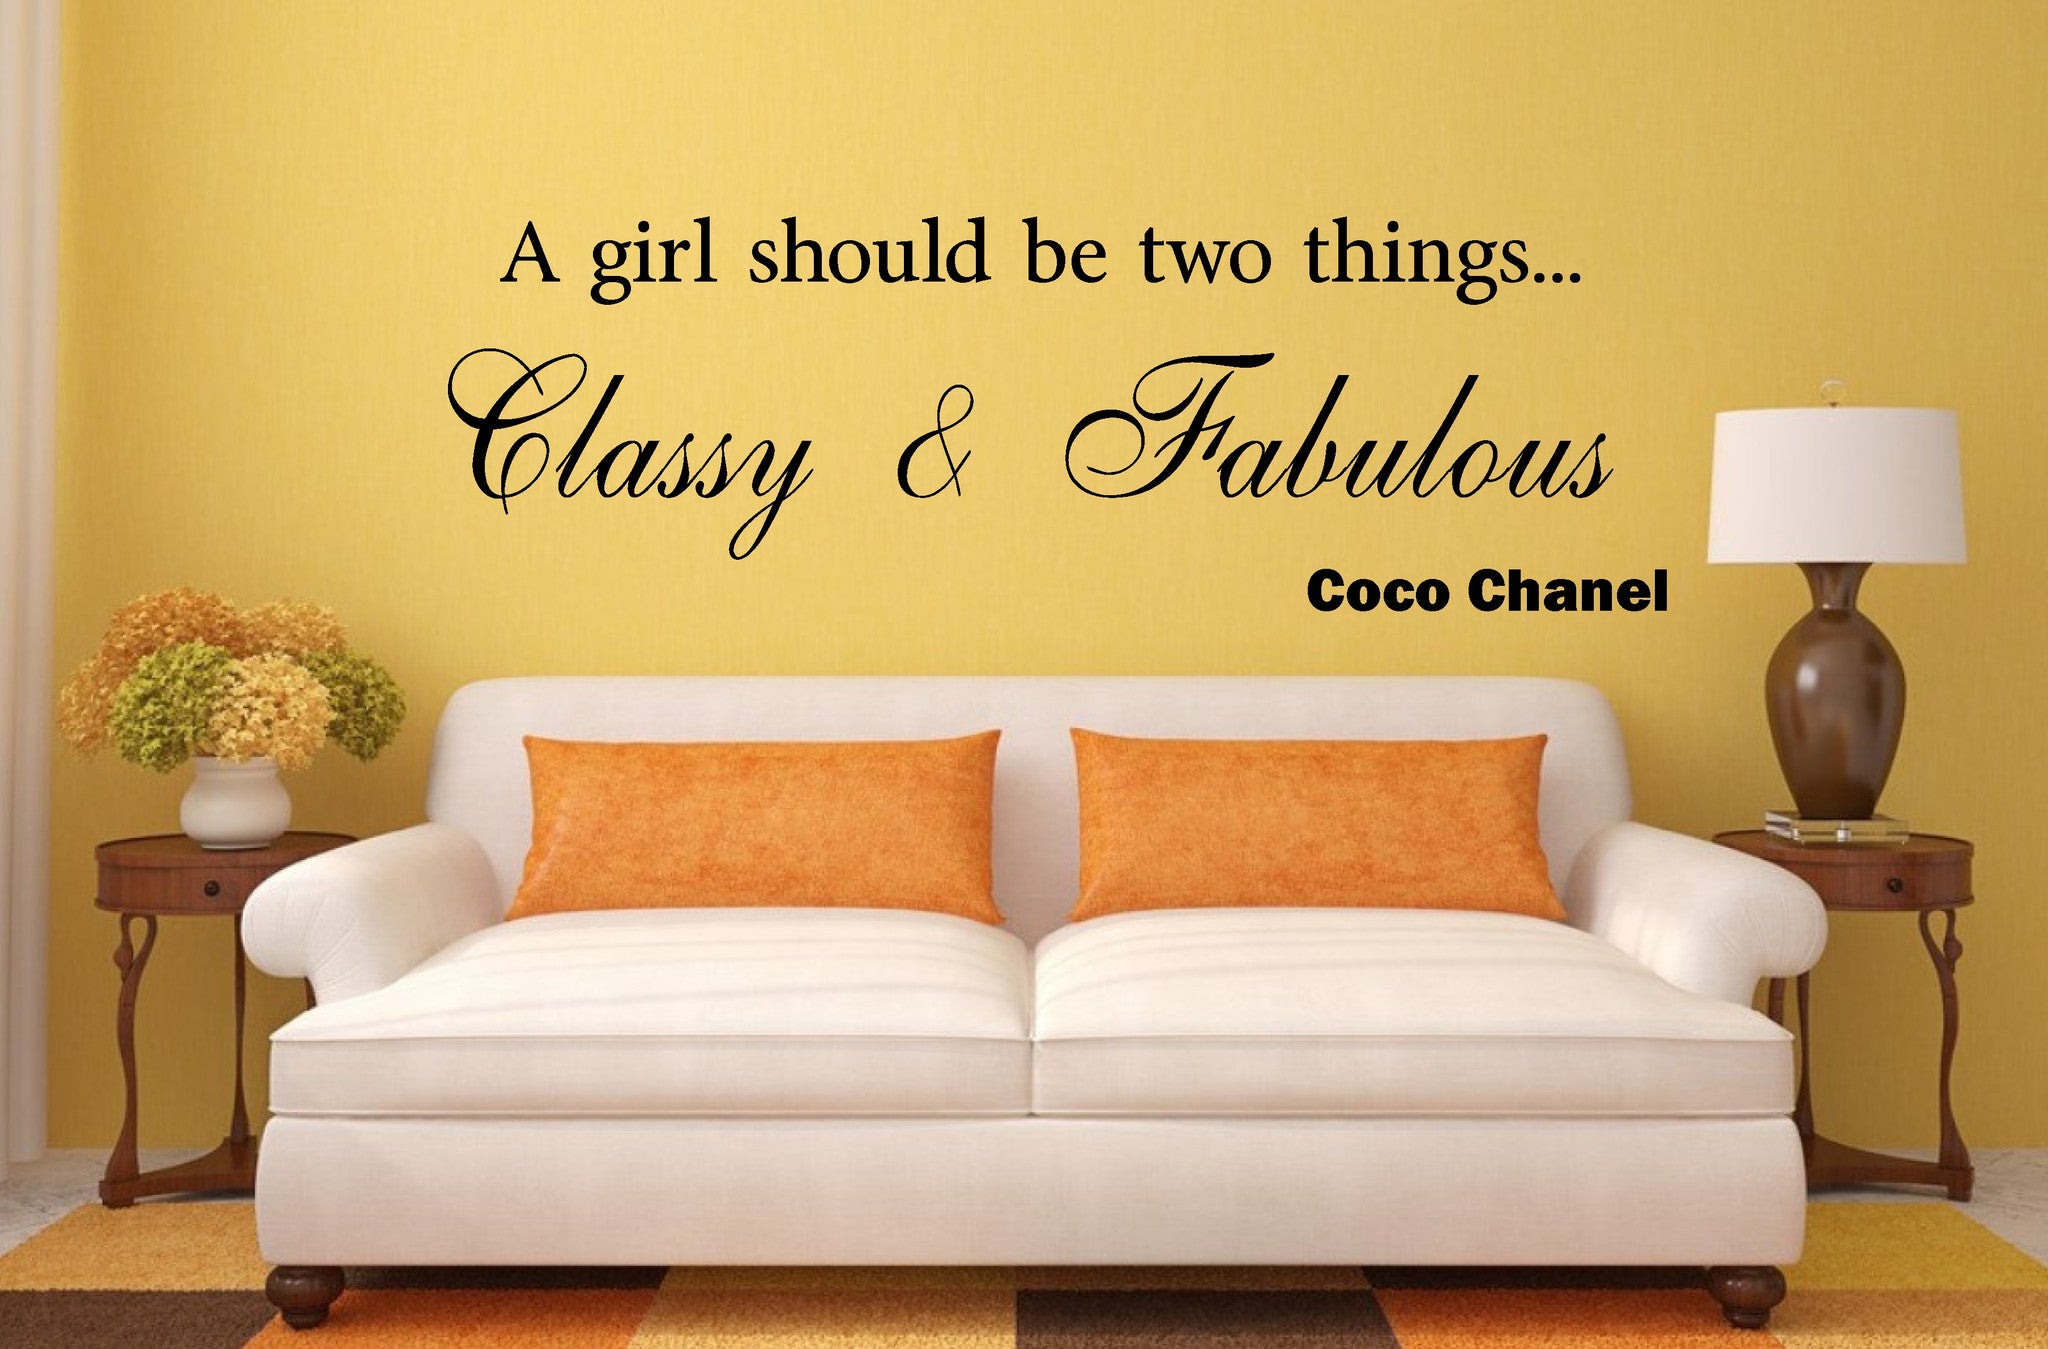 Coco Chanel Pictures Wall, Coco Chanel Home Decoration